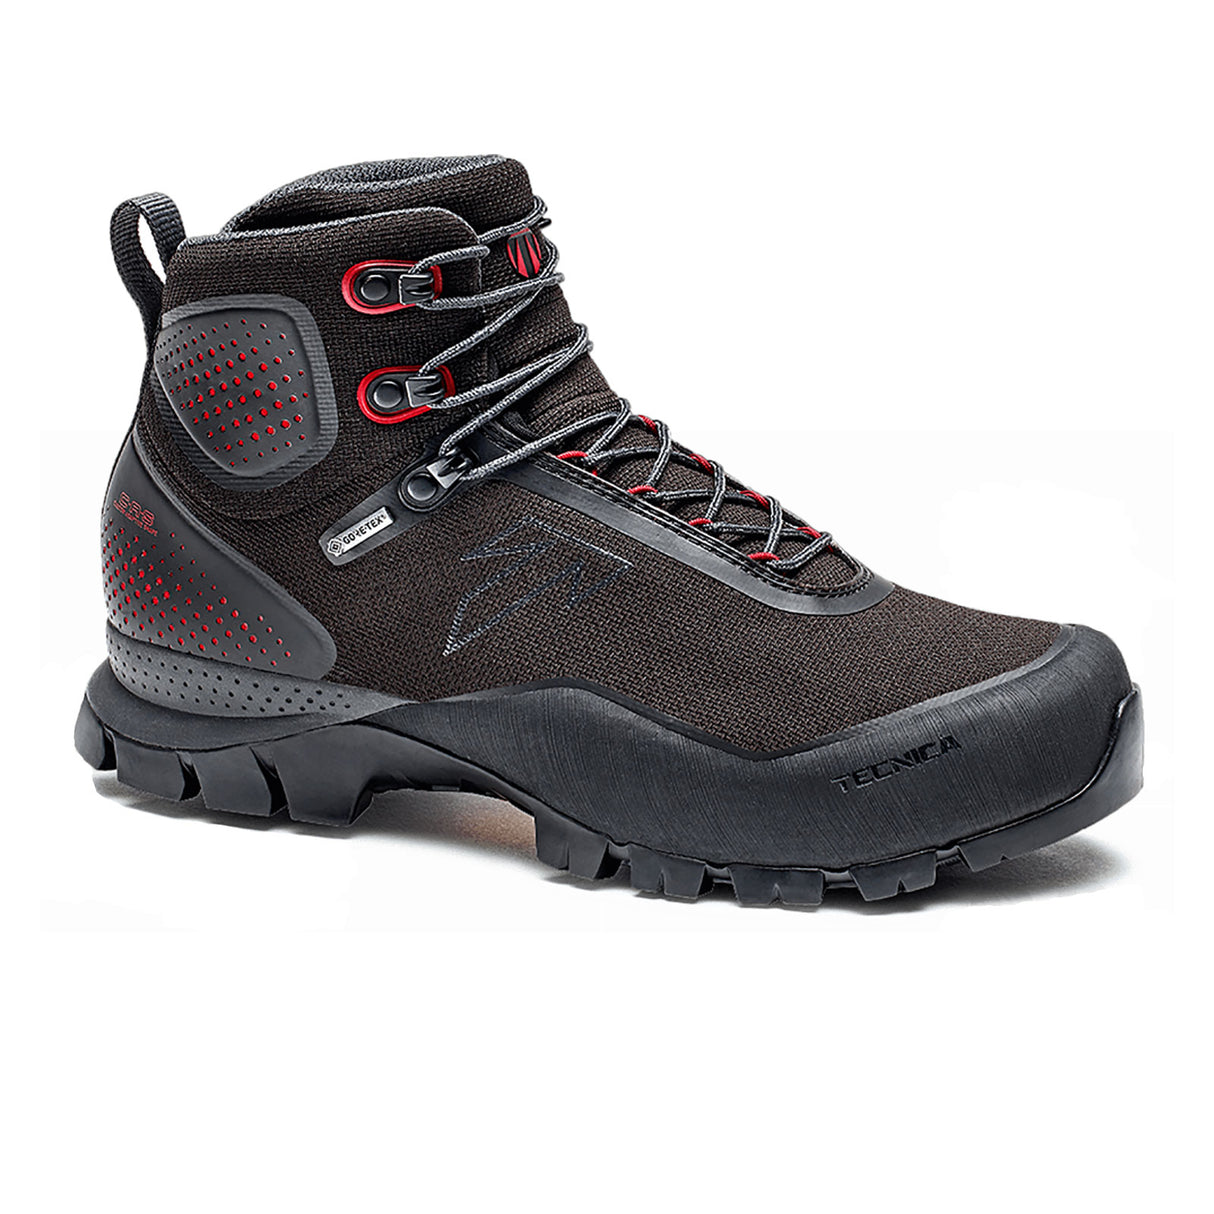 Tecnica Forge S GTX Mid Hiking Boot (Women) - Black/Jester Red Boots - Hiking - Mid - The Heel Shoe Fitters